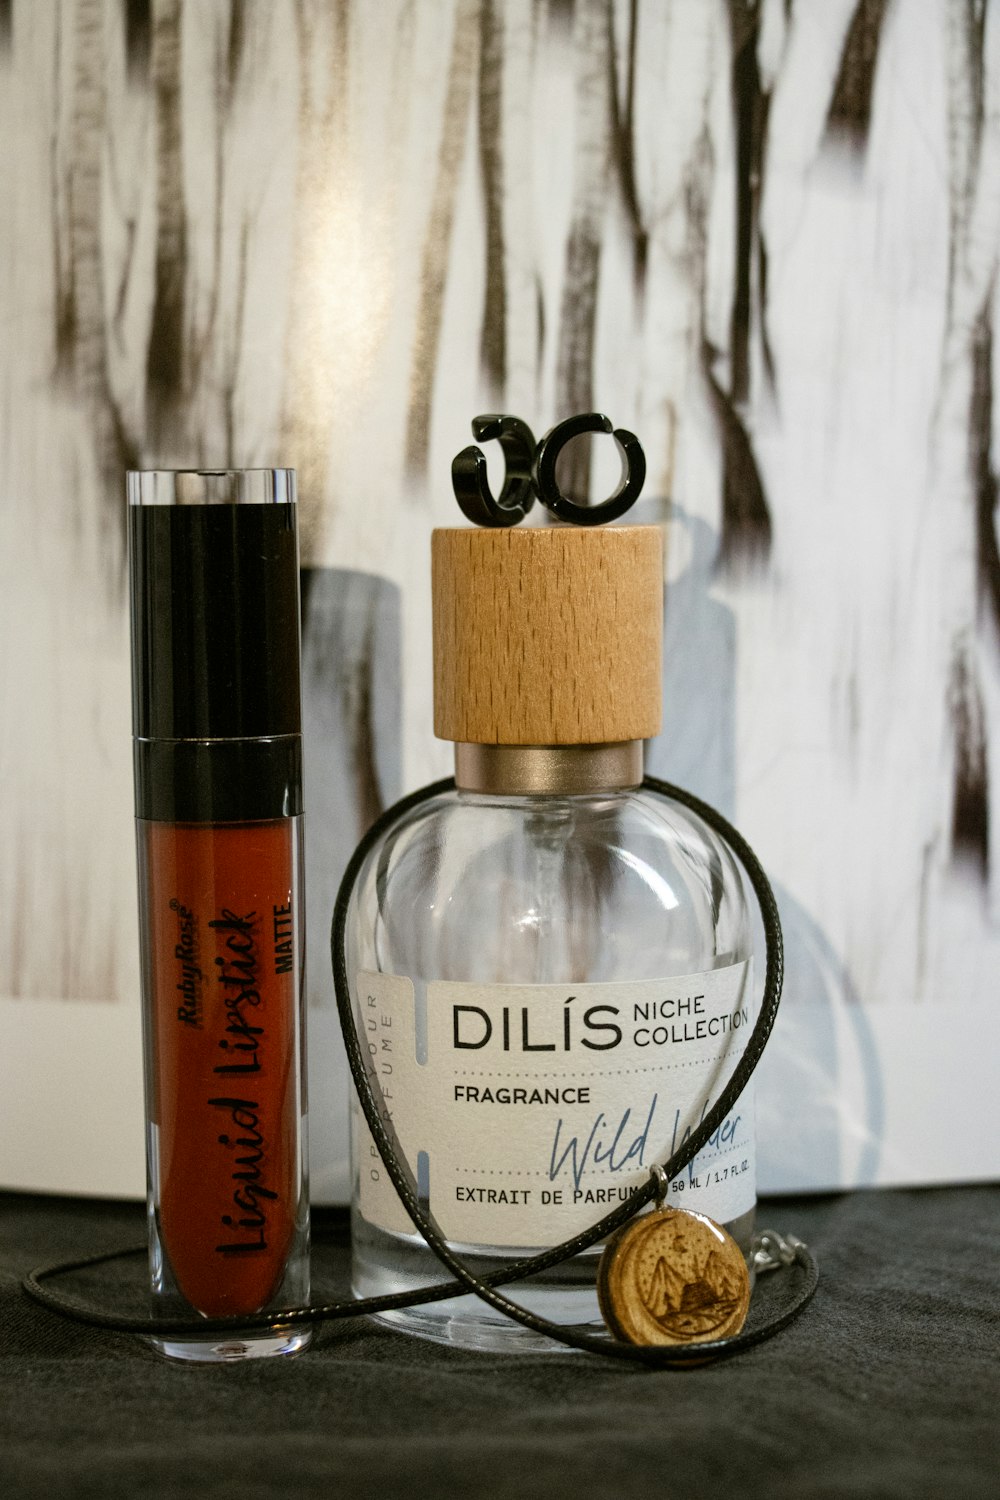 a bottle of perfume next to a bottle of lipstick